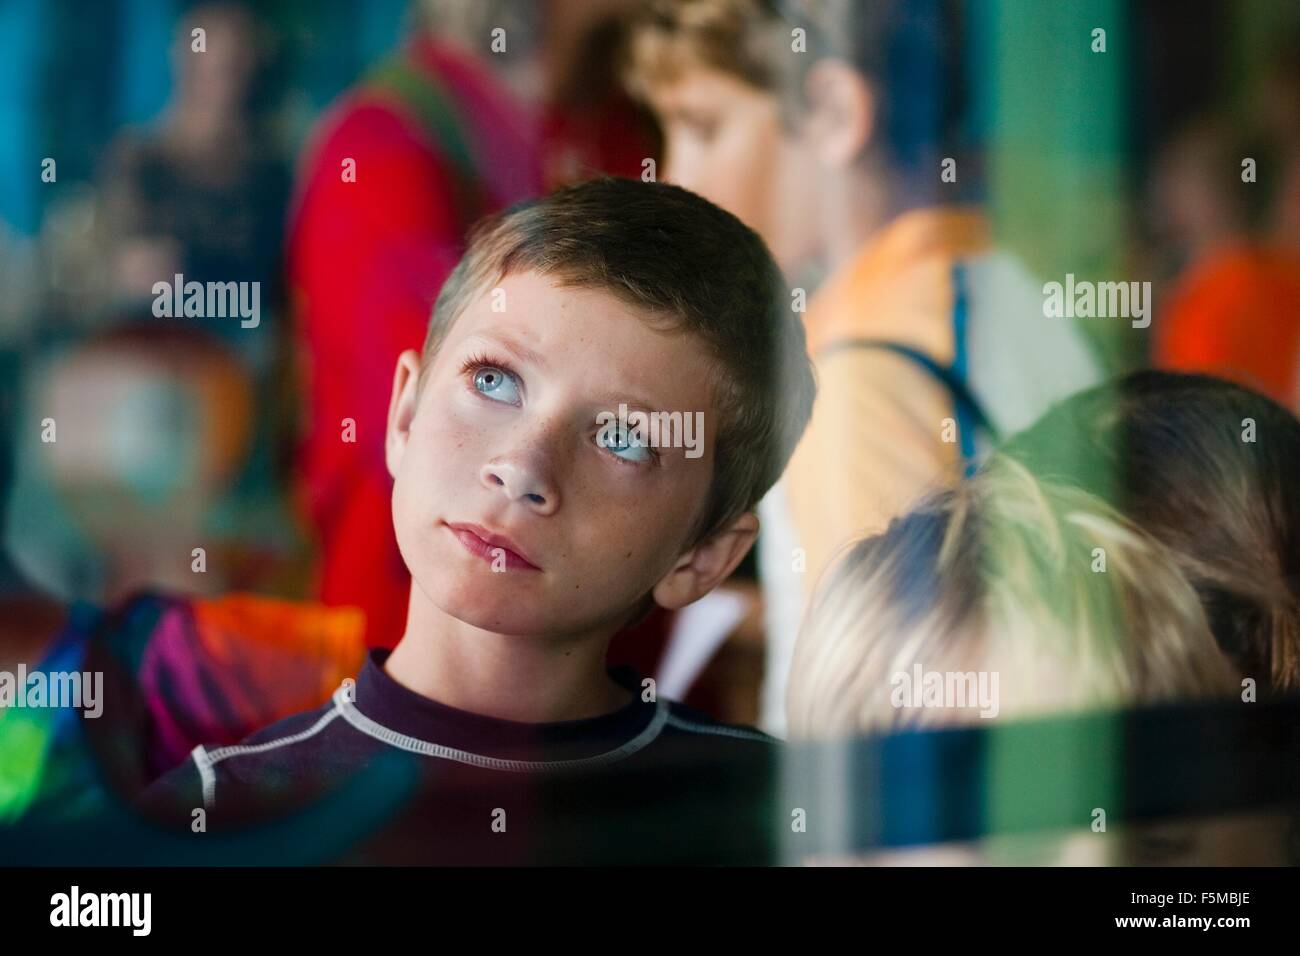 View through glass of young boy on outing looking up thoughtfully Stock Photo